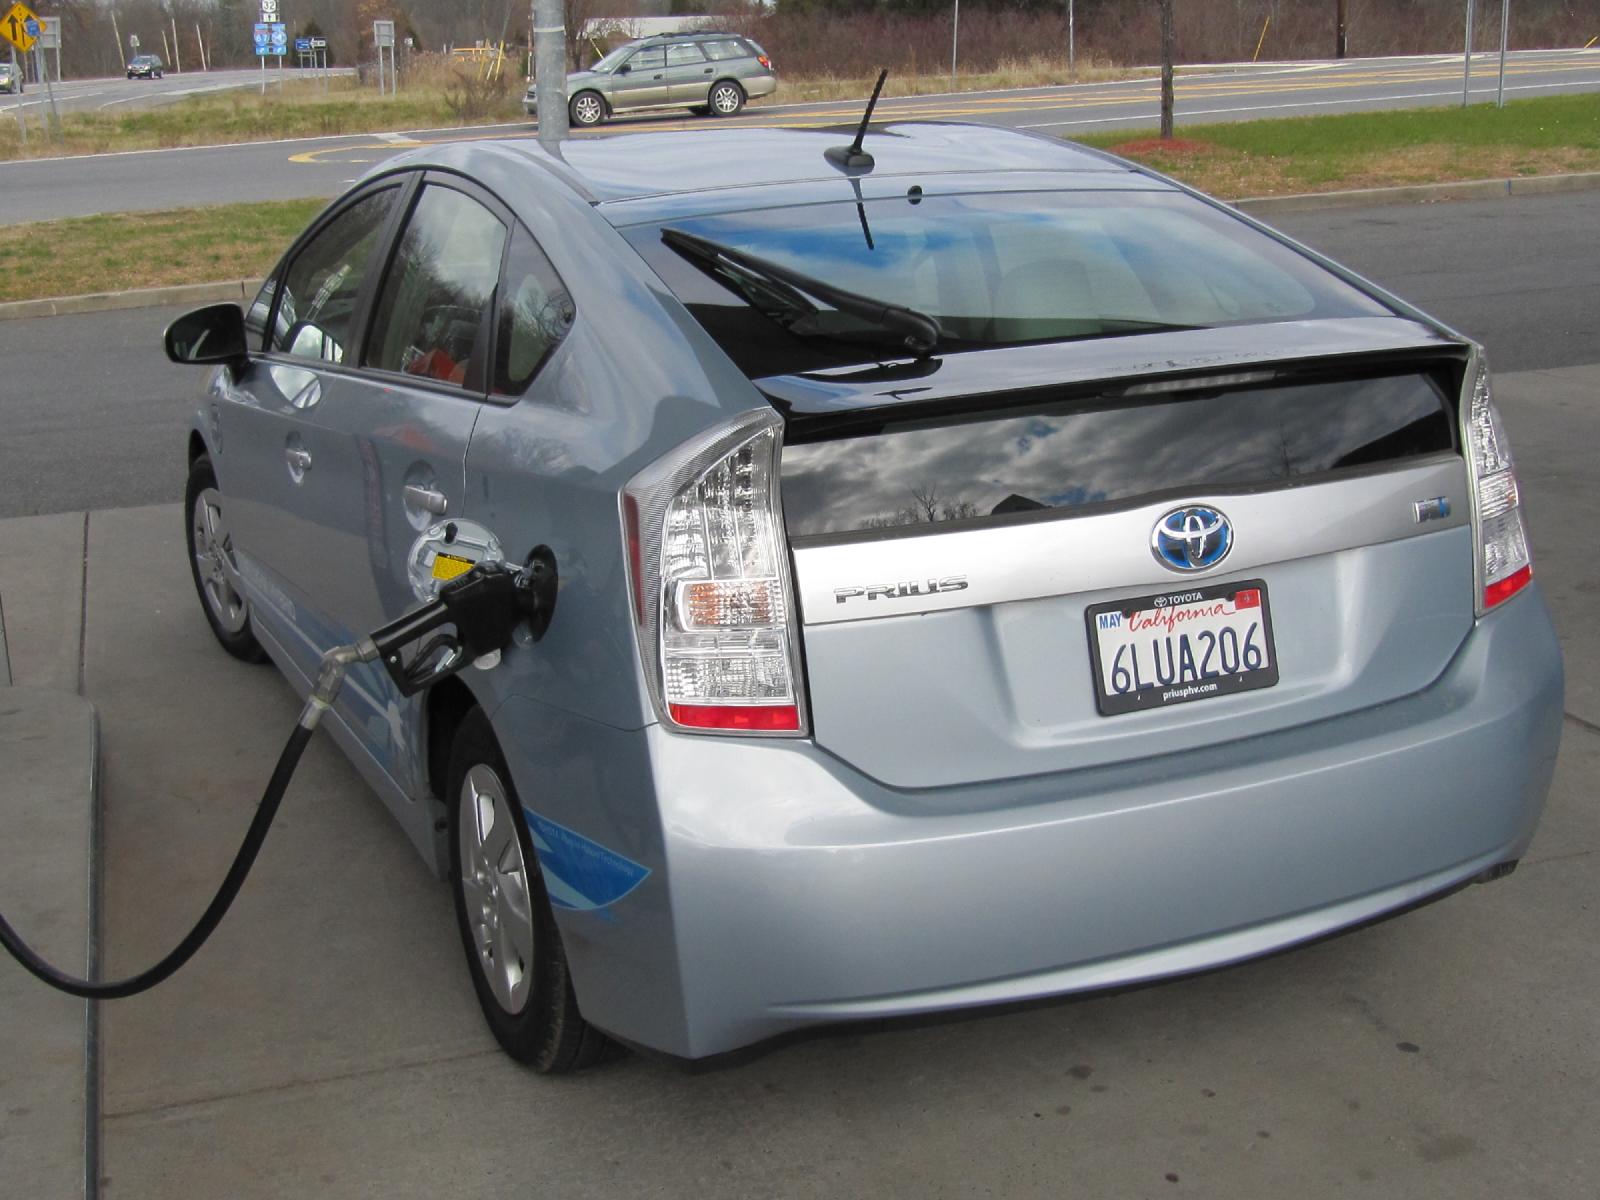 Toyota Fixes Quirks On Upcoming 2012 Prius Plug-In Hybrid